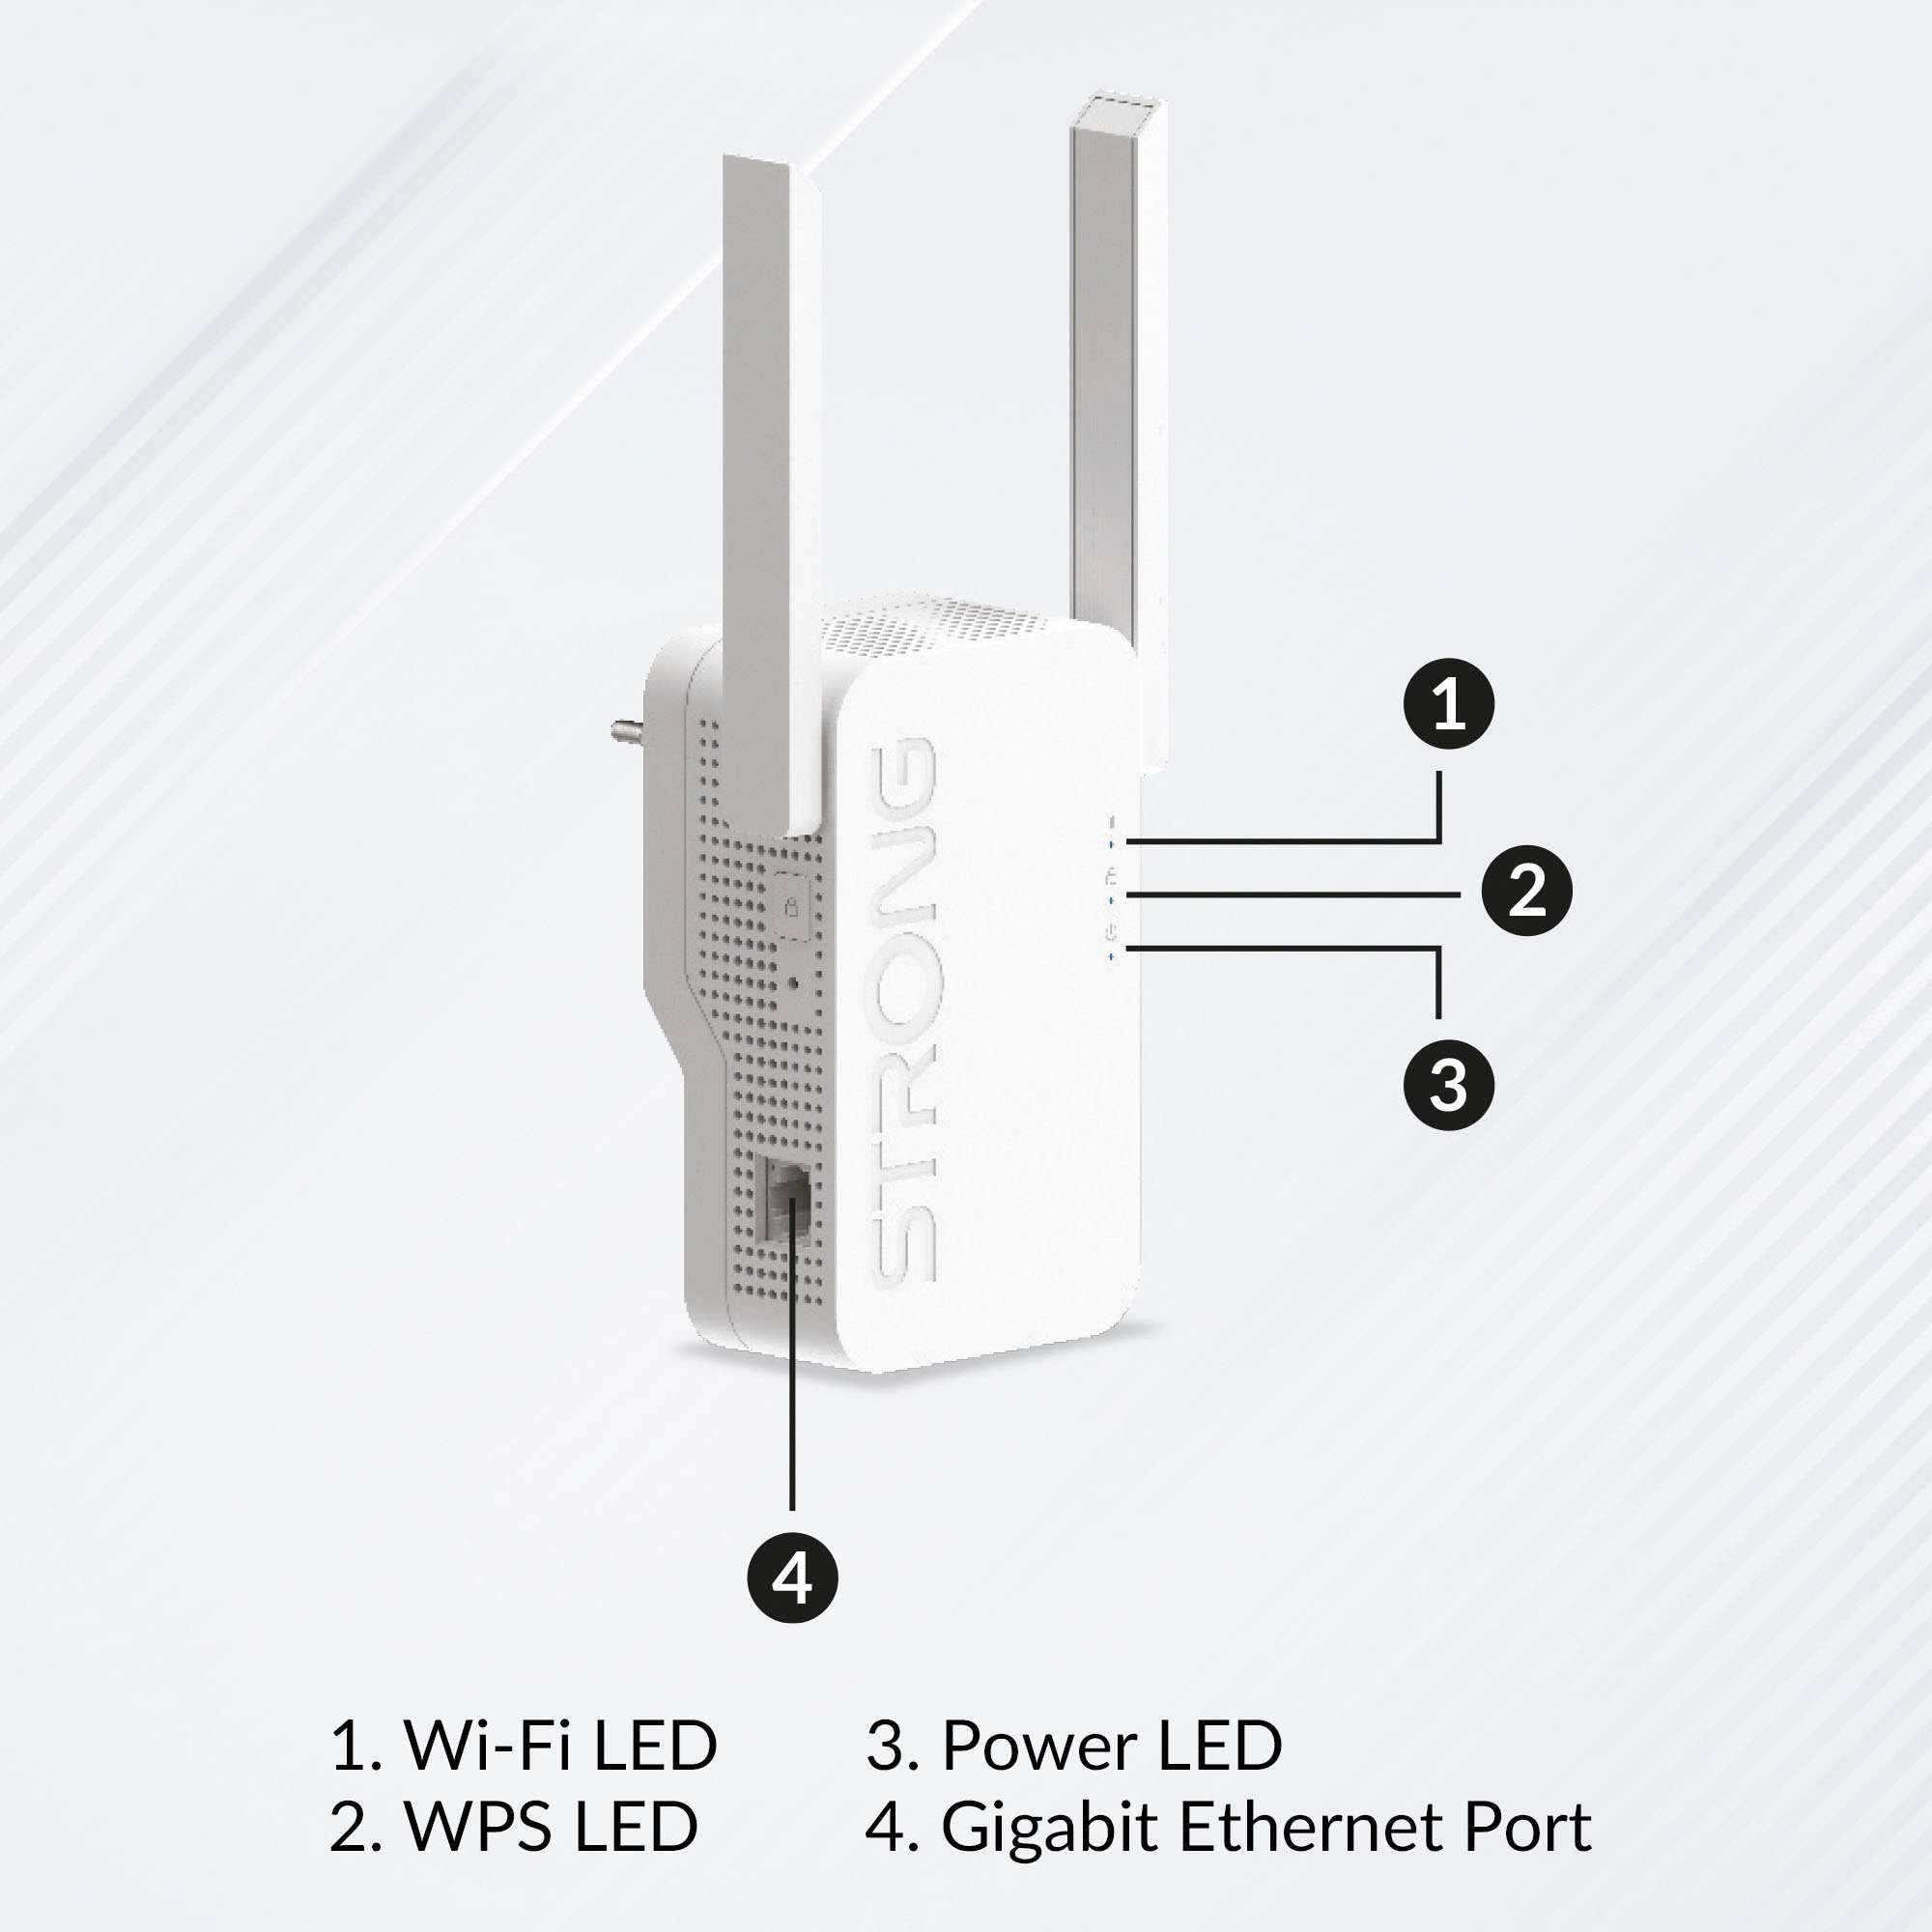 Strong WLAN-Repeater »Dualband WLAN Repeater, WiFi 6, Accesspoint«, (1 St.)